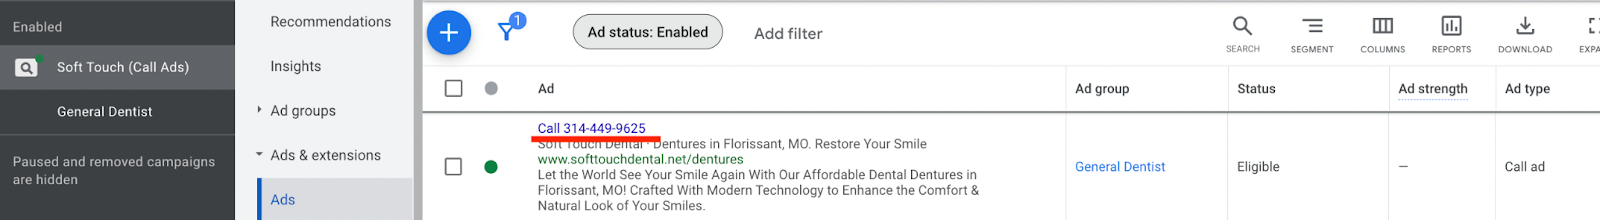 generate leads with Google Ads for dentists